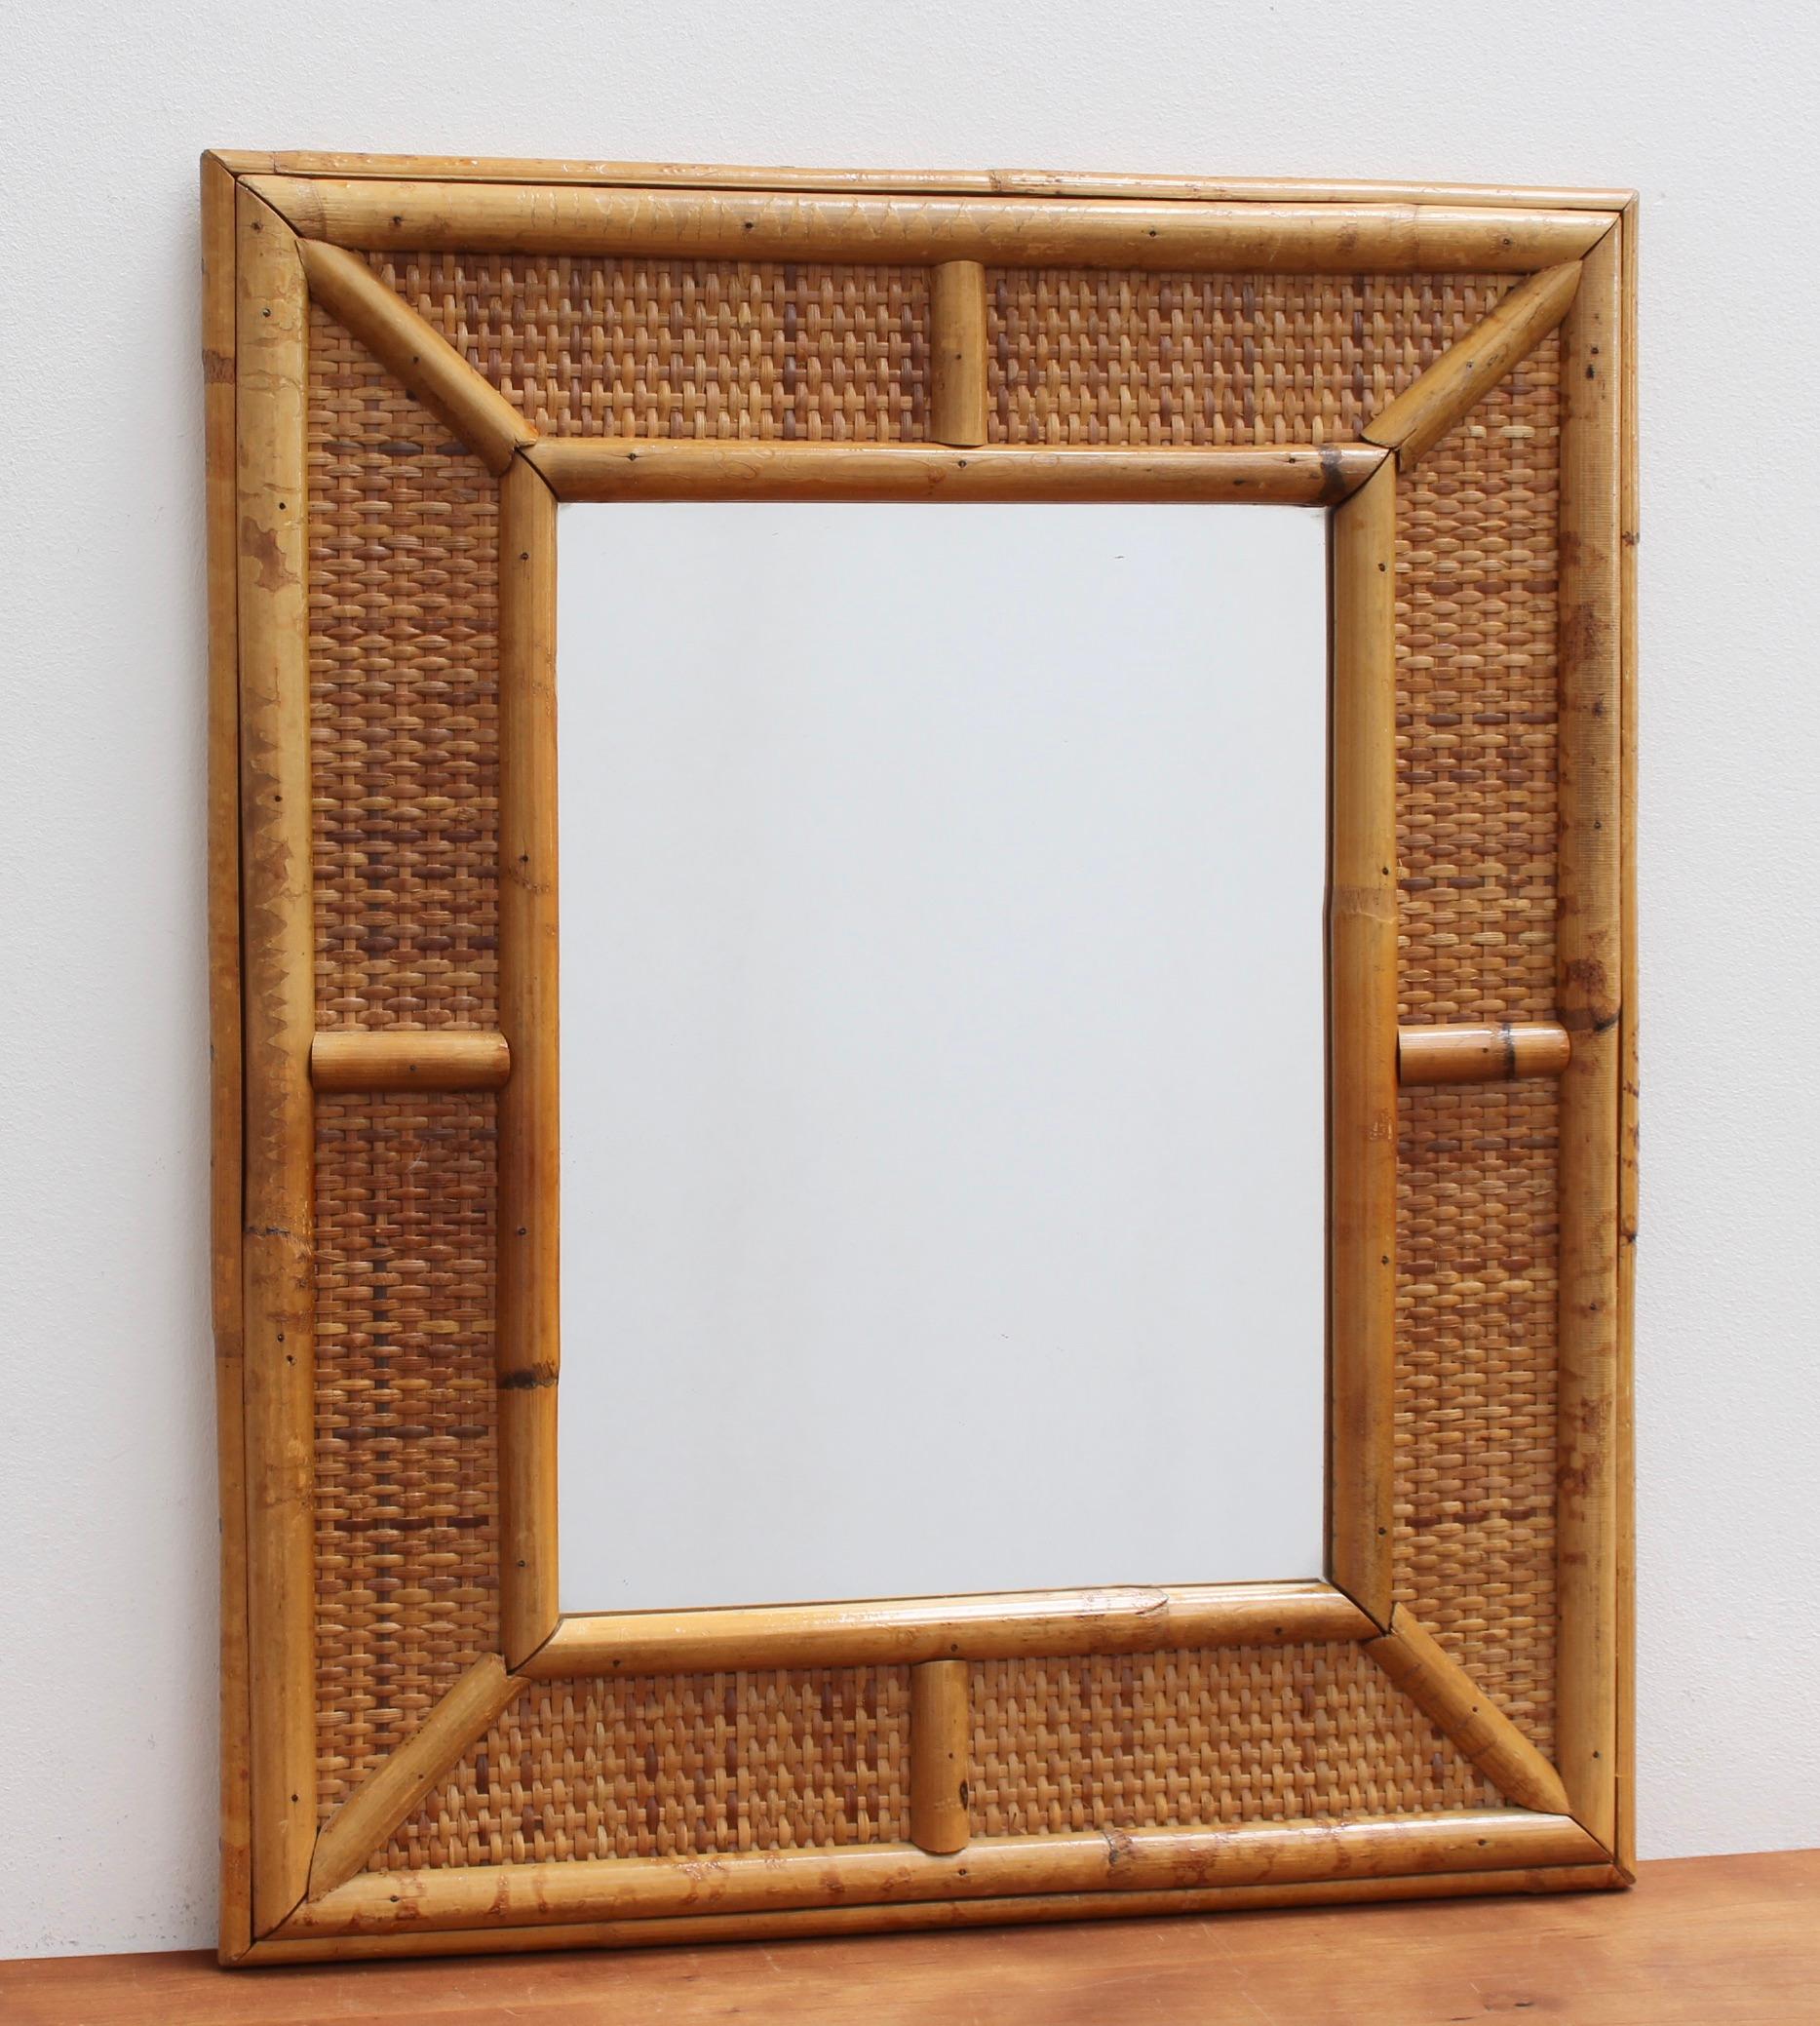 Mid-century French wicker and rattan wall mirror, (circa 1960s). This mirror has a delightful rectangular shape with glass enclosed by the caned frame which is itself, framed by wicker and more cane. The wicker In between the two frames is